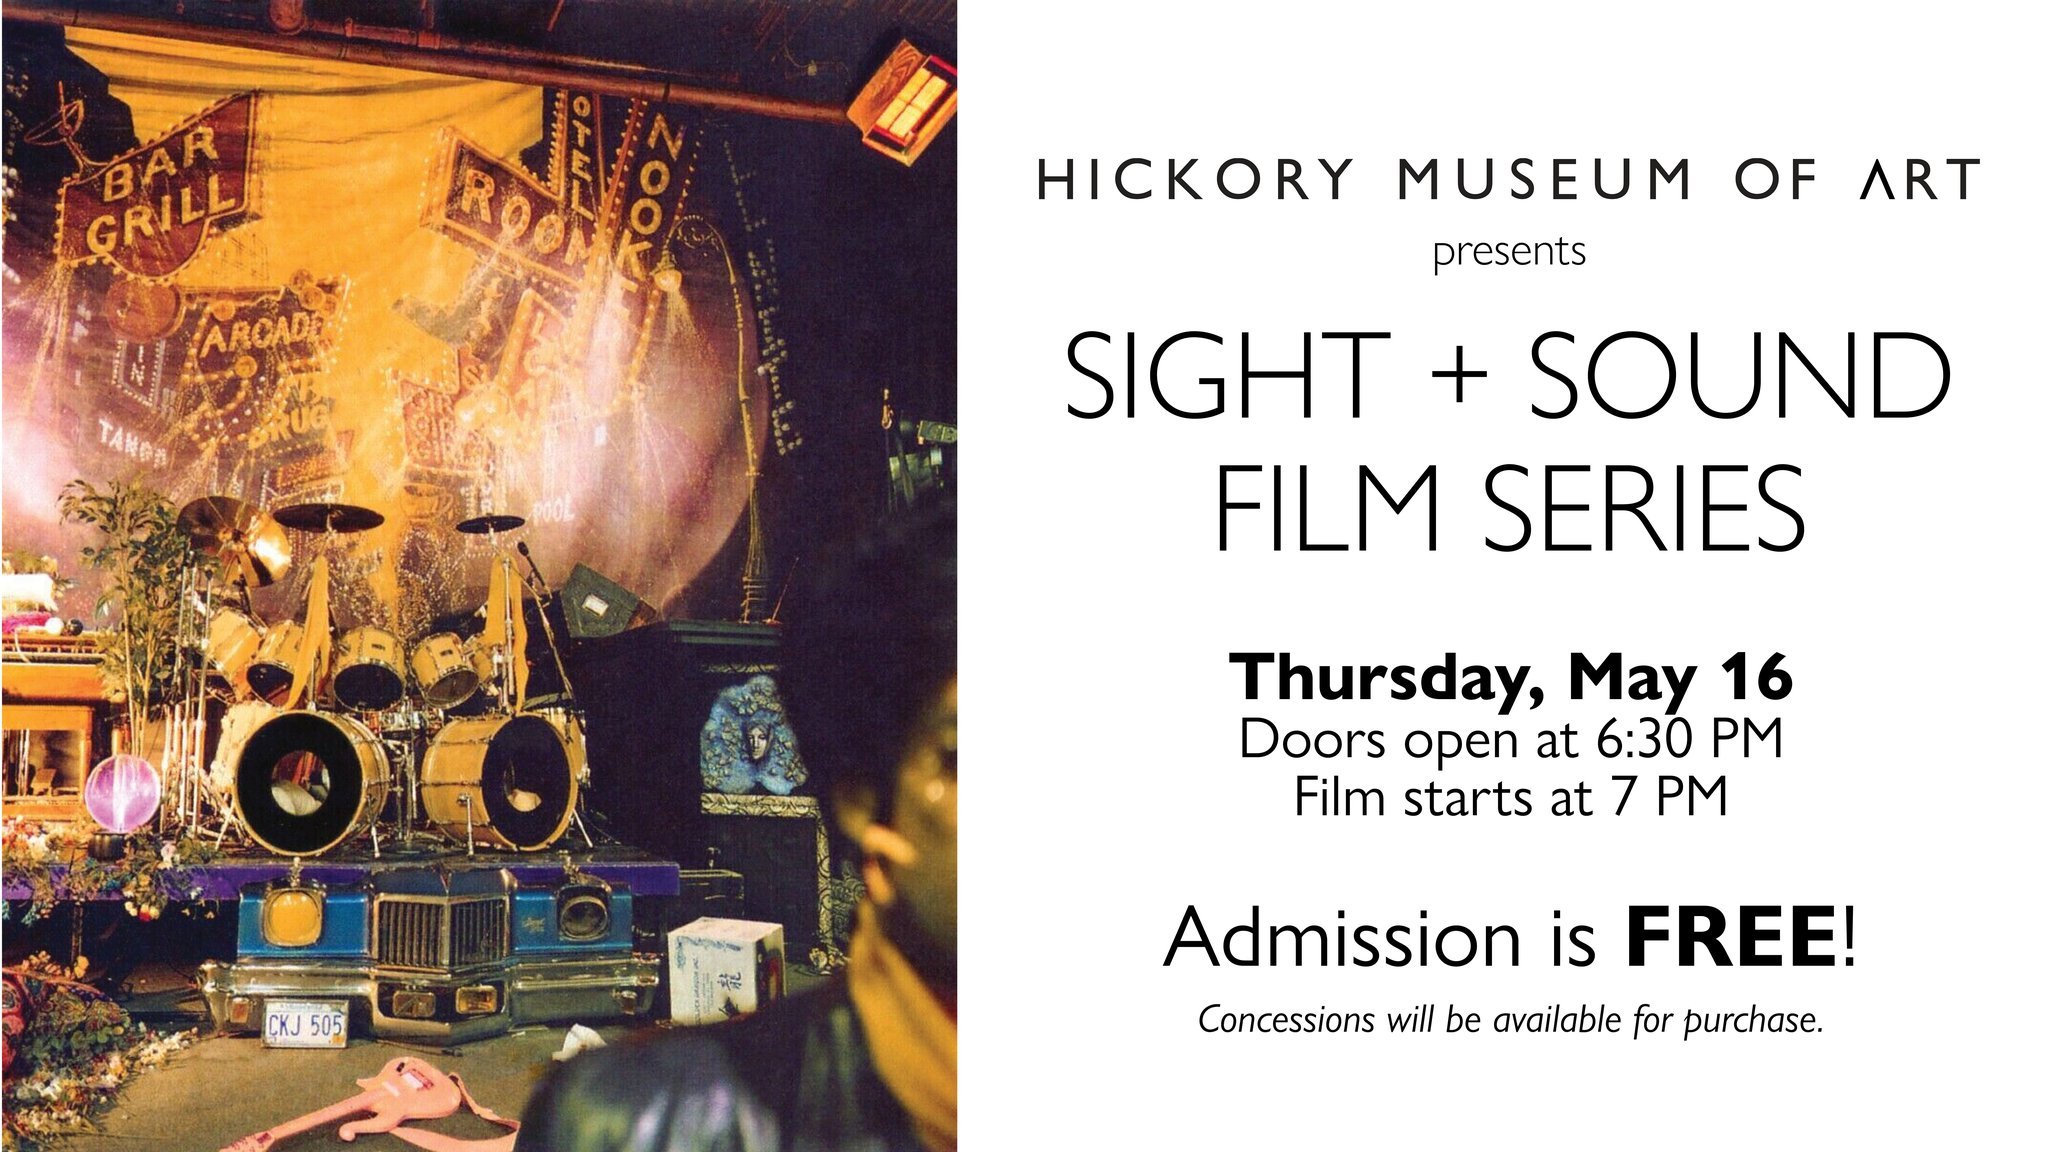 Hooray for Amanda Tyler McGuire, the lucky winner of our Sight + Sound mystery posts drawing! She's bagged herself a $20 gift card to spend in shopHMA. Everyone's a winner in this evening's SIGHT + SOUND series film viewing. Admission is free and fun